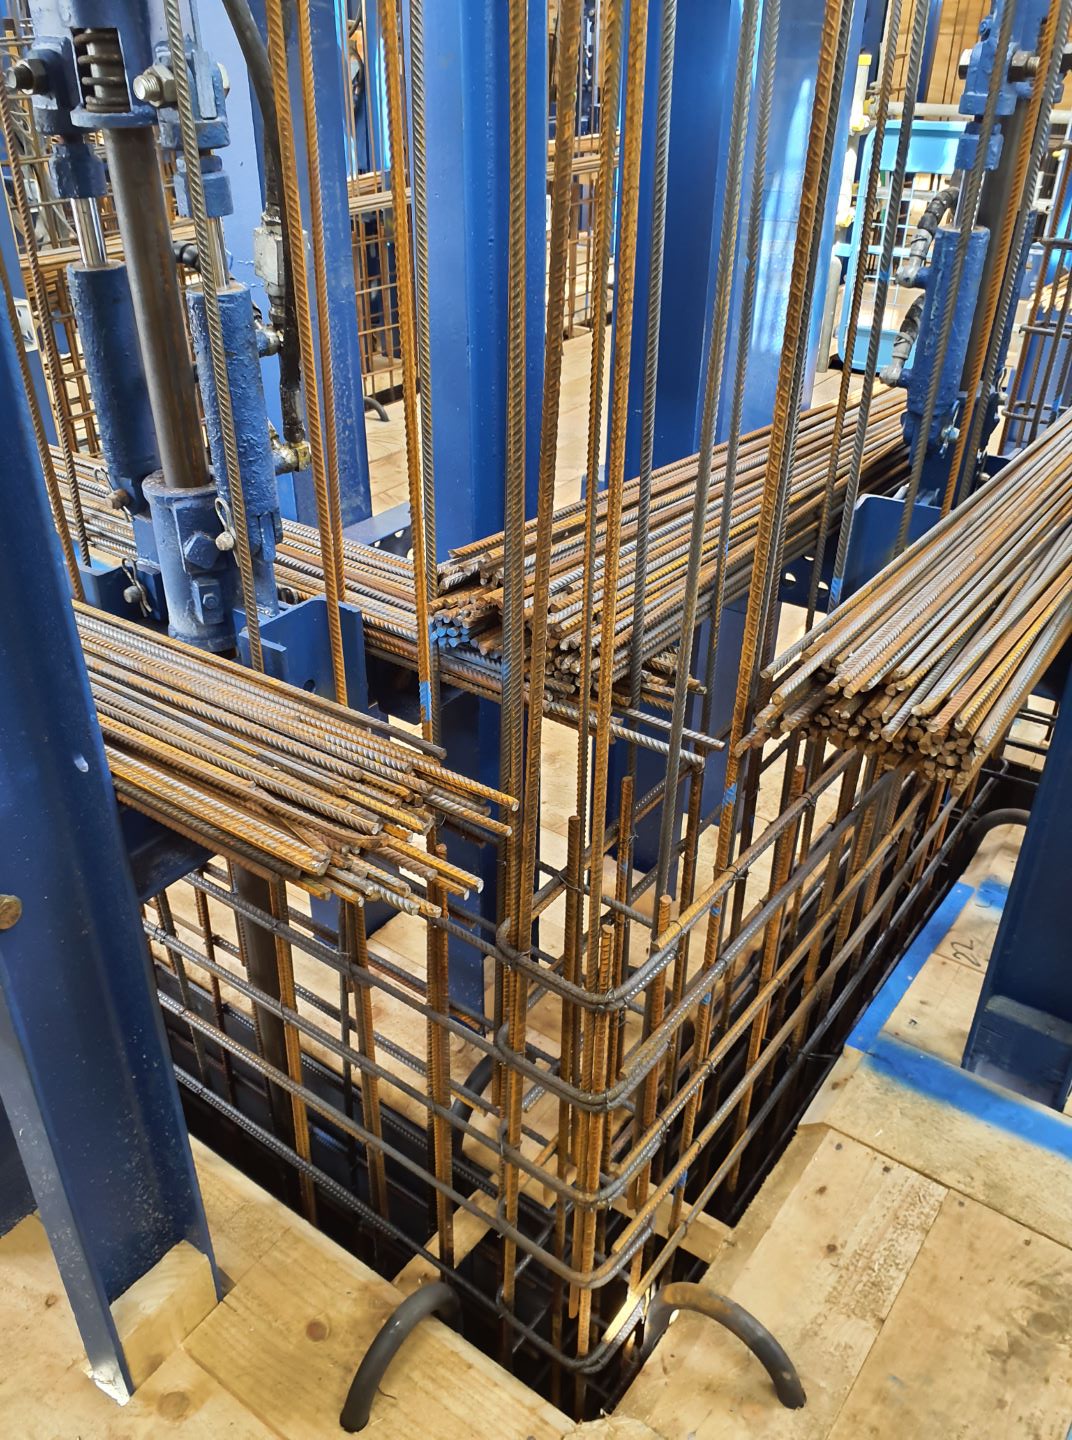 Interior of a building being built with blue beams and thick metal wire